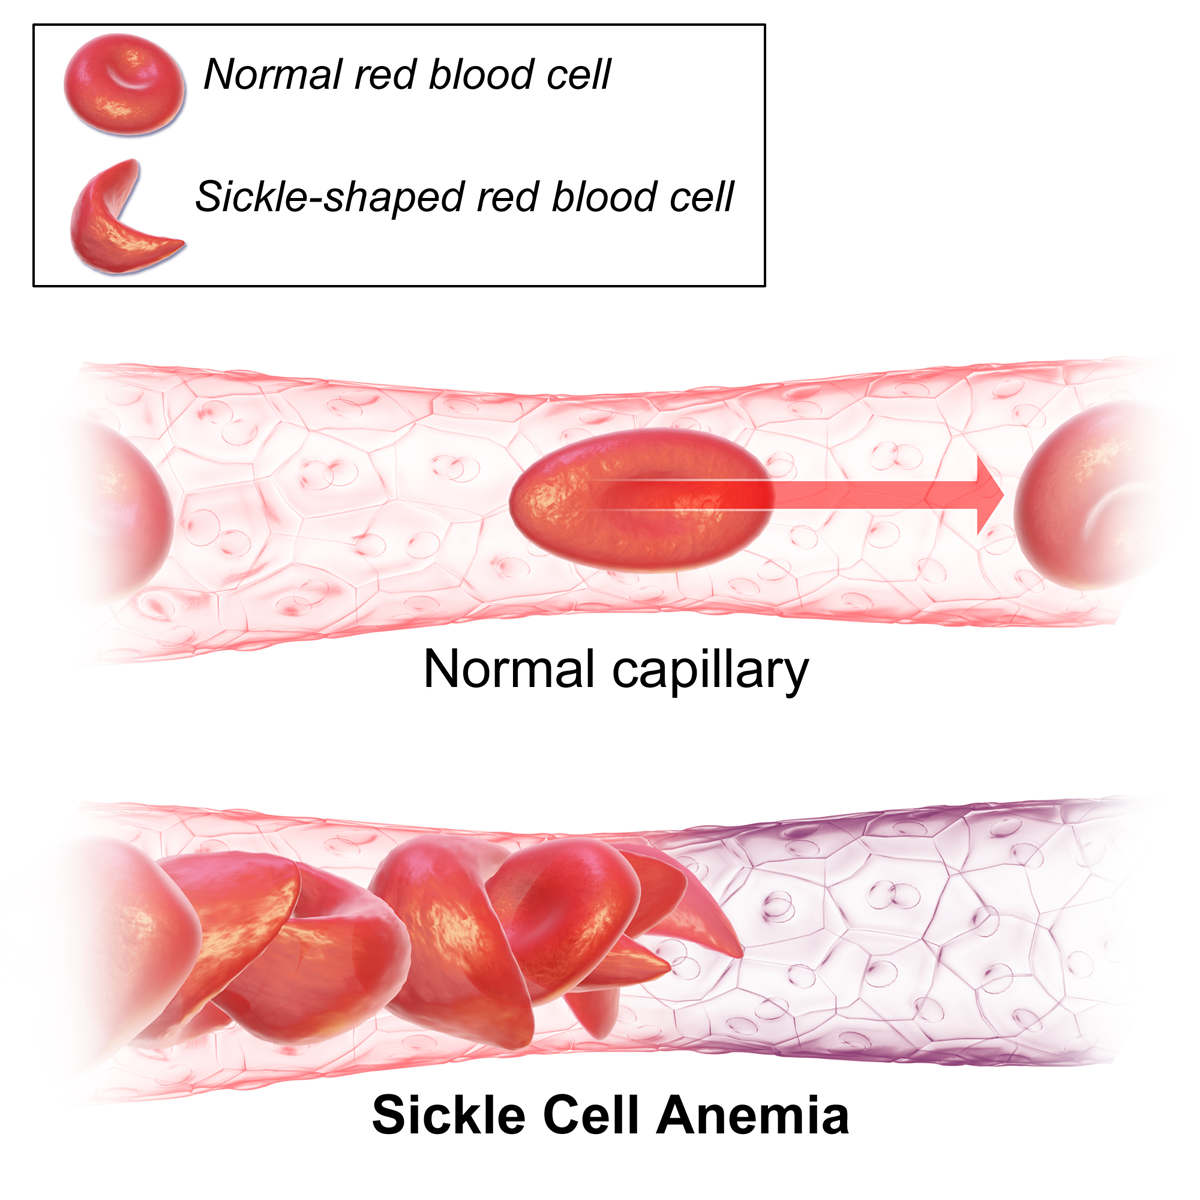 Deformed red blood cells in patients with sickle cell anemia (Source: Wikipedia)